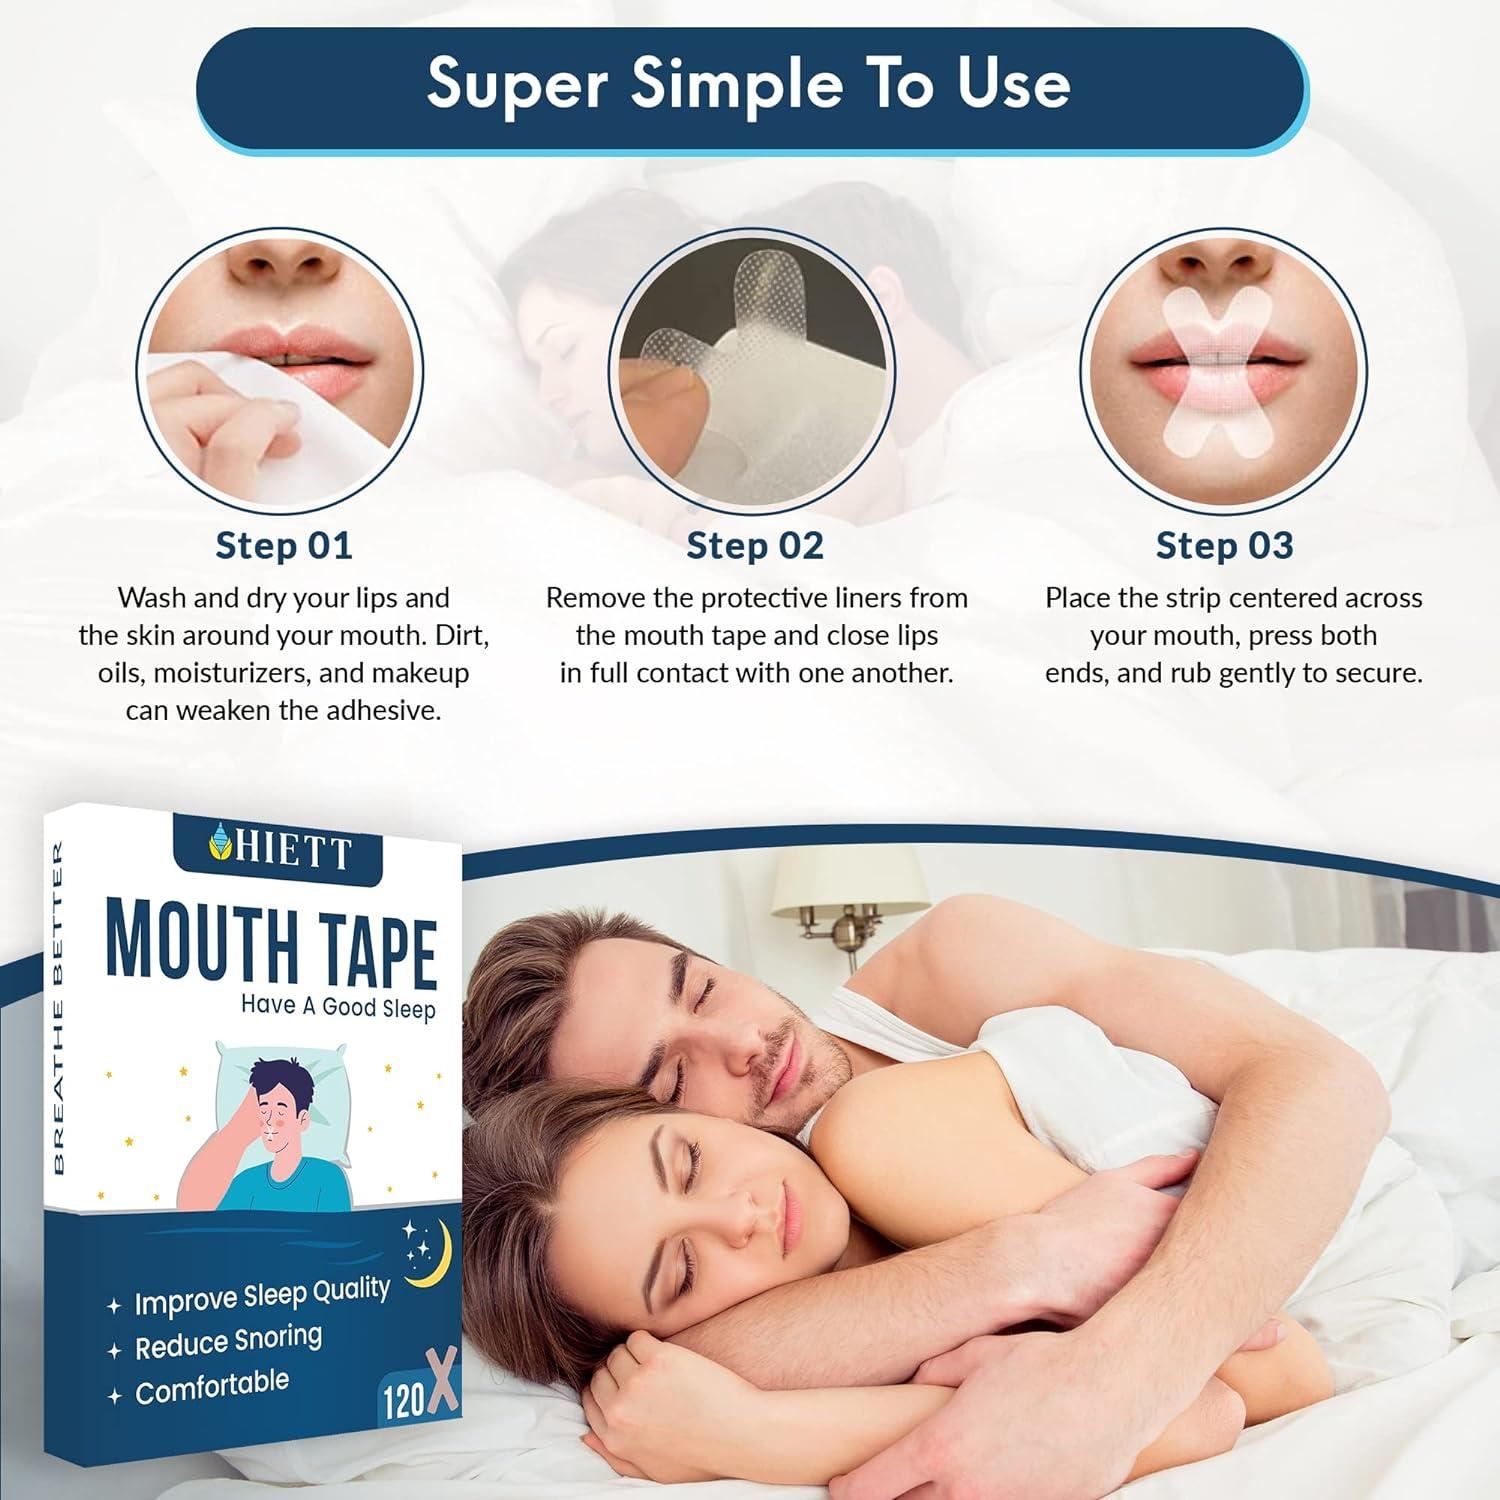 Every Night, Thousands Sleep Better with This Mouth Tape. A